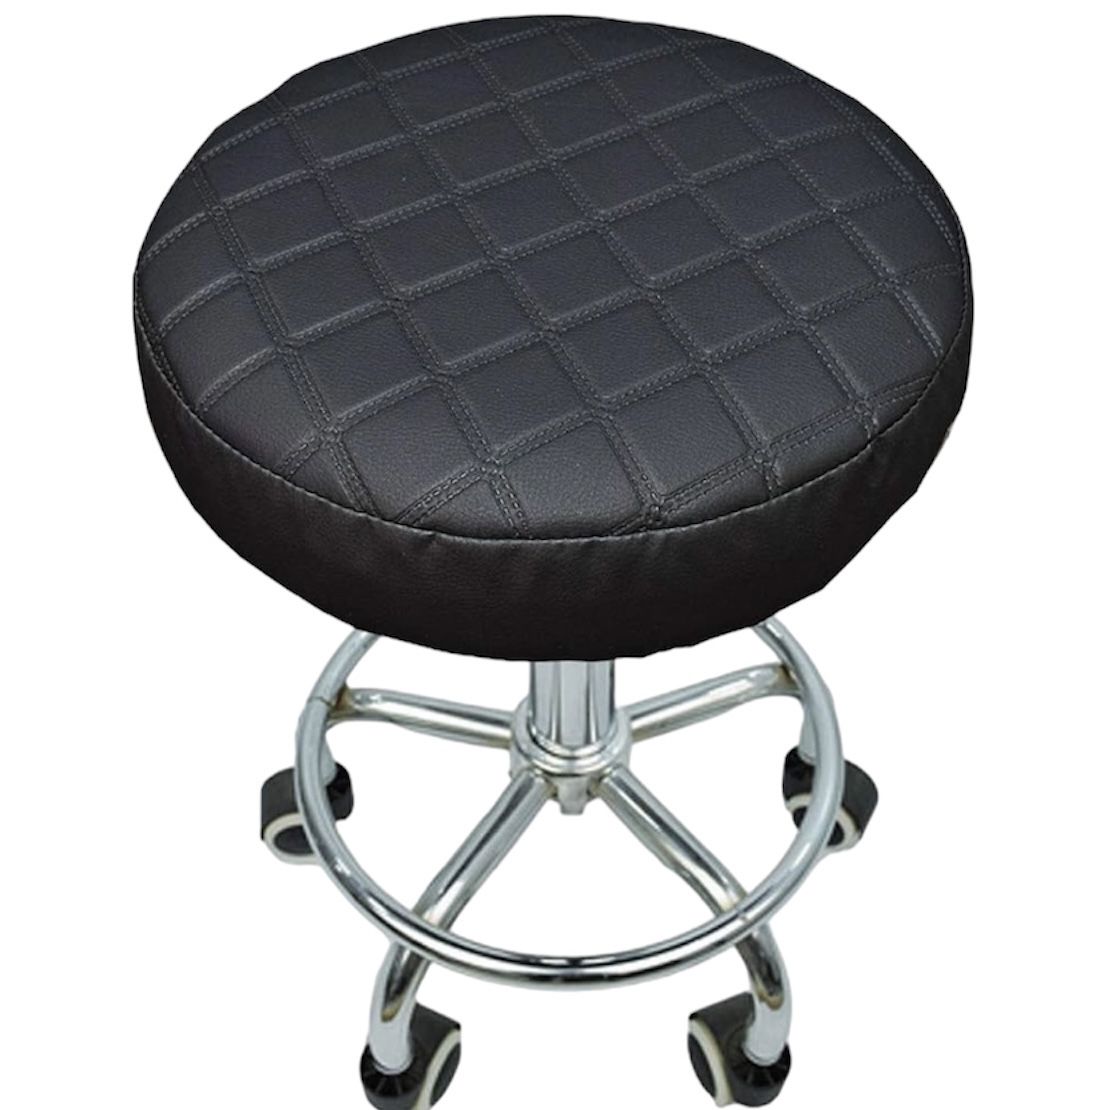 Quilted Waterproof Faux Leather Round Barstool Seat Cover Anti-Slip Padded Bar Stool Cushion